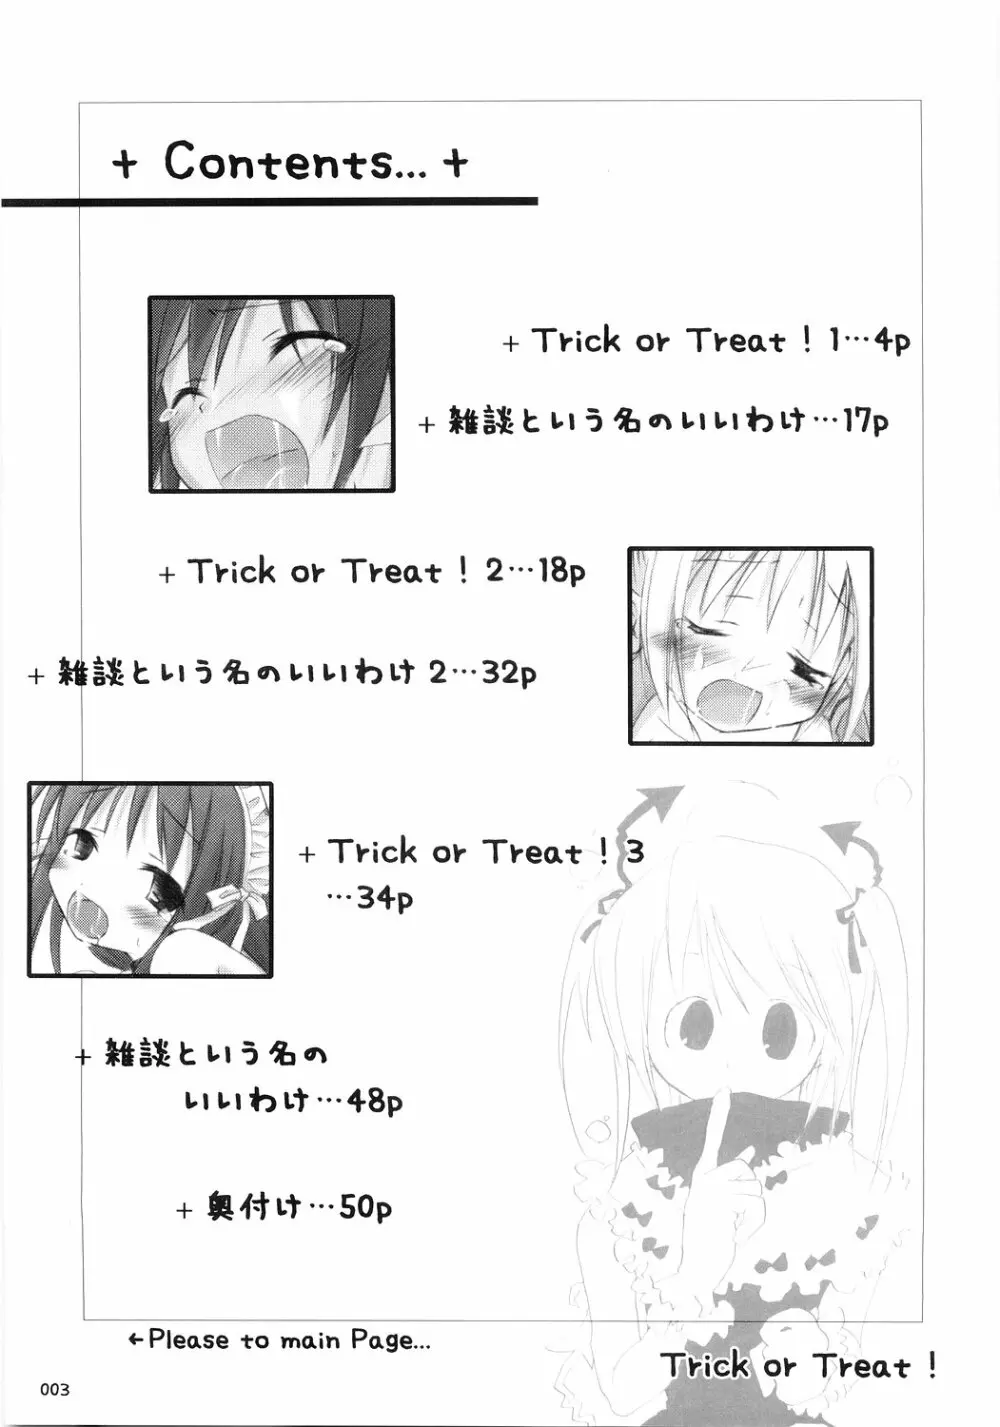 Trick or Treat! ～総集編～ Page.2